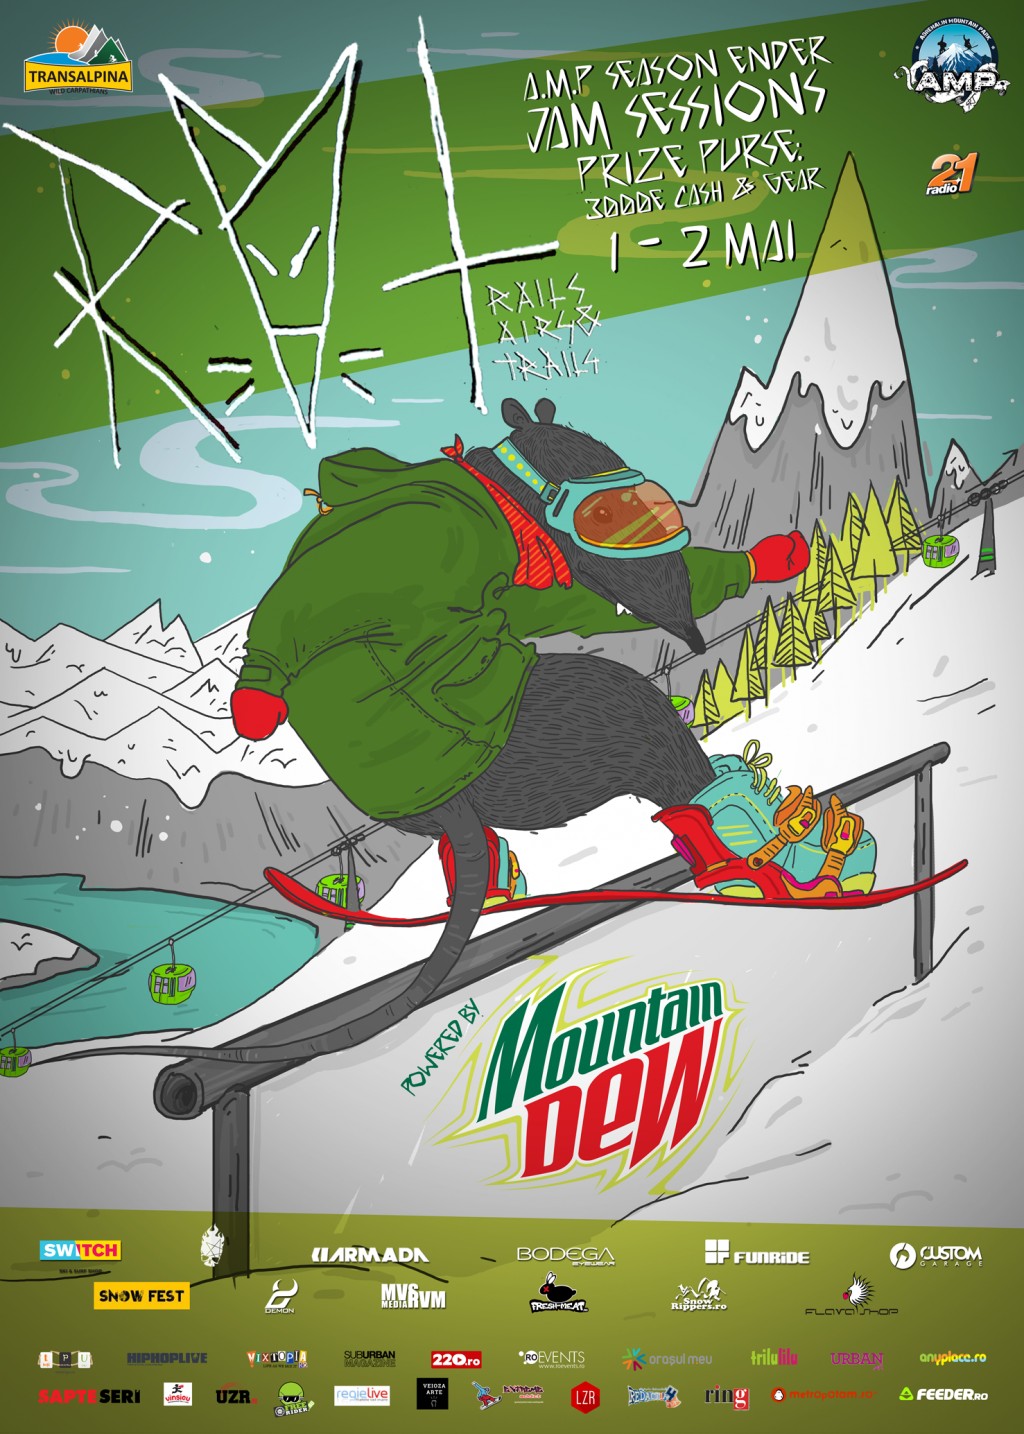 Snowboarding Contest powered by Montain Dew